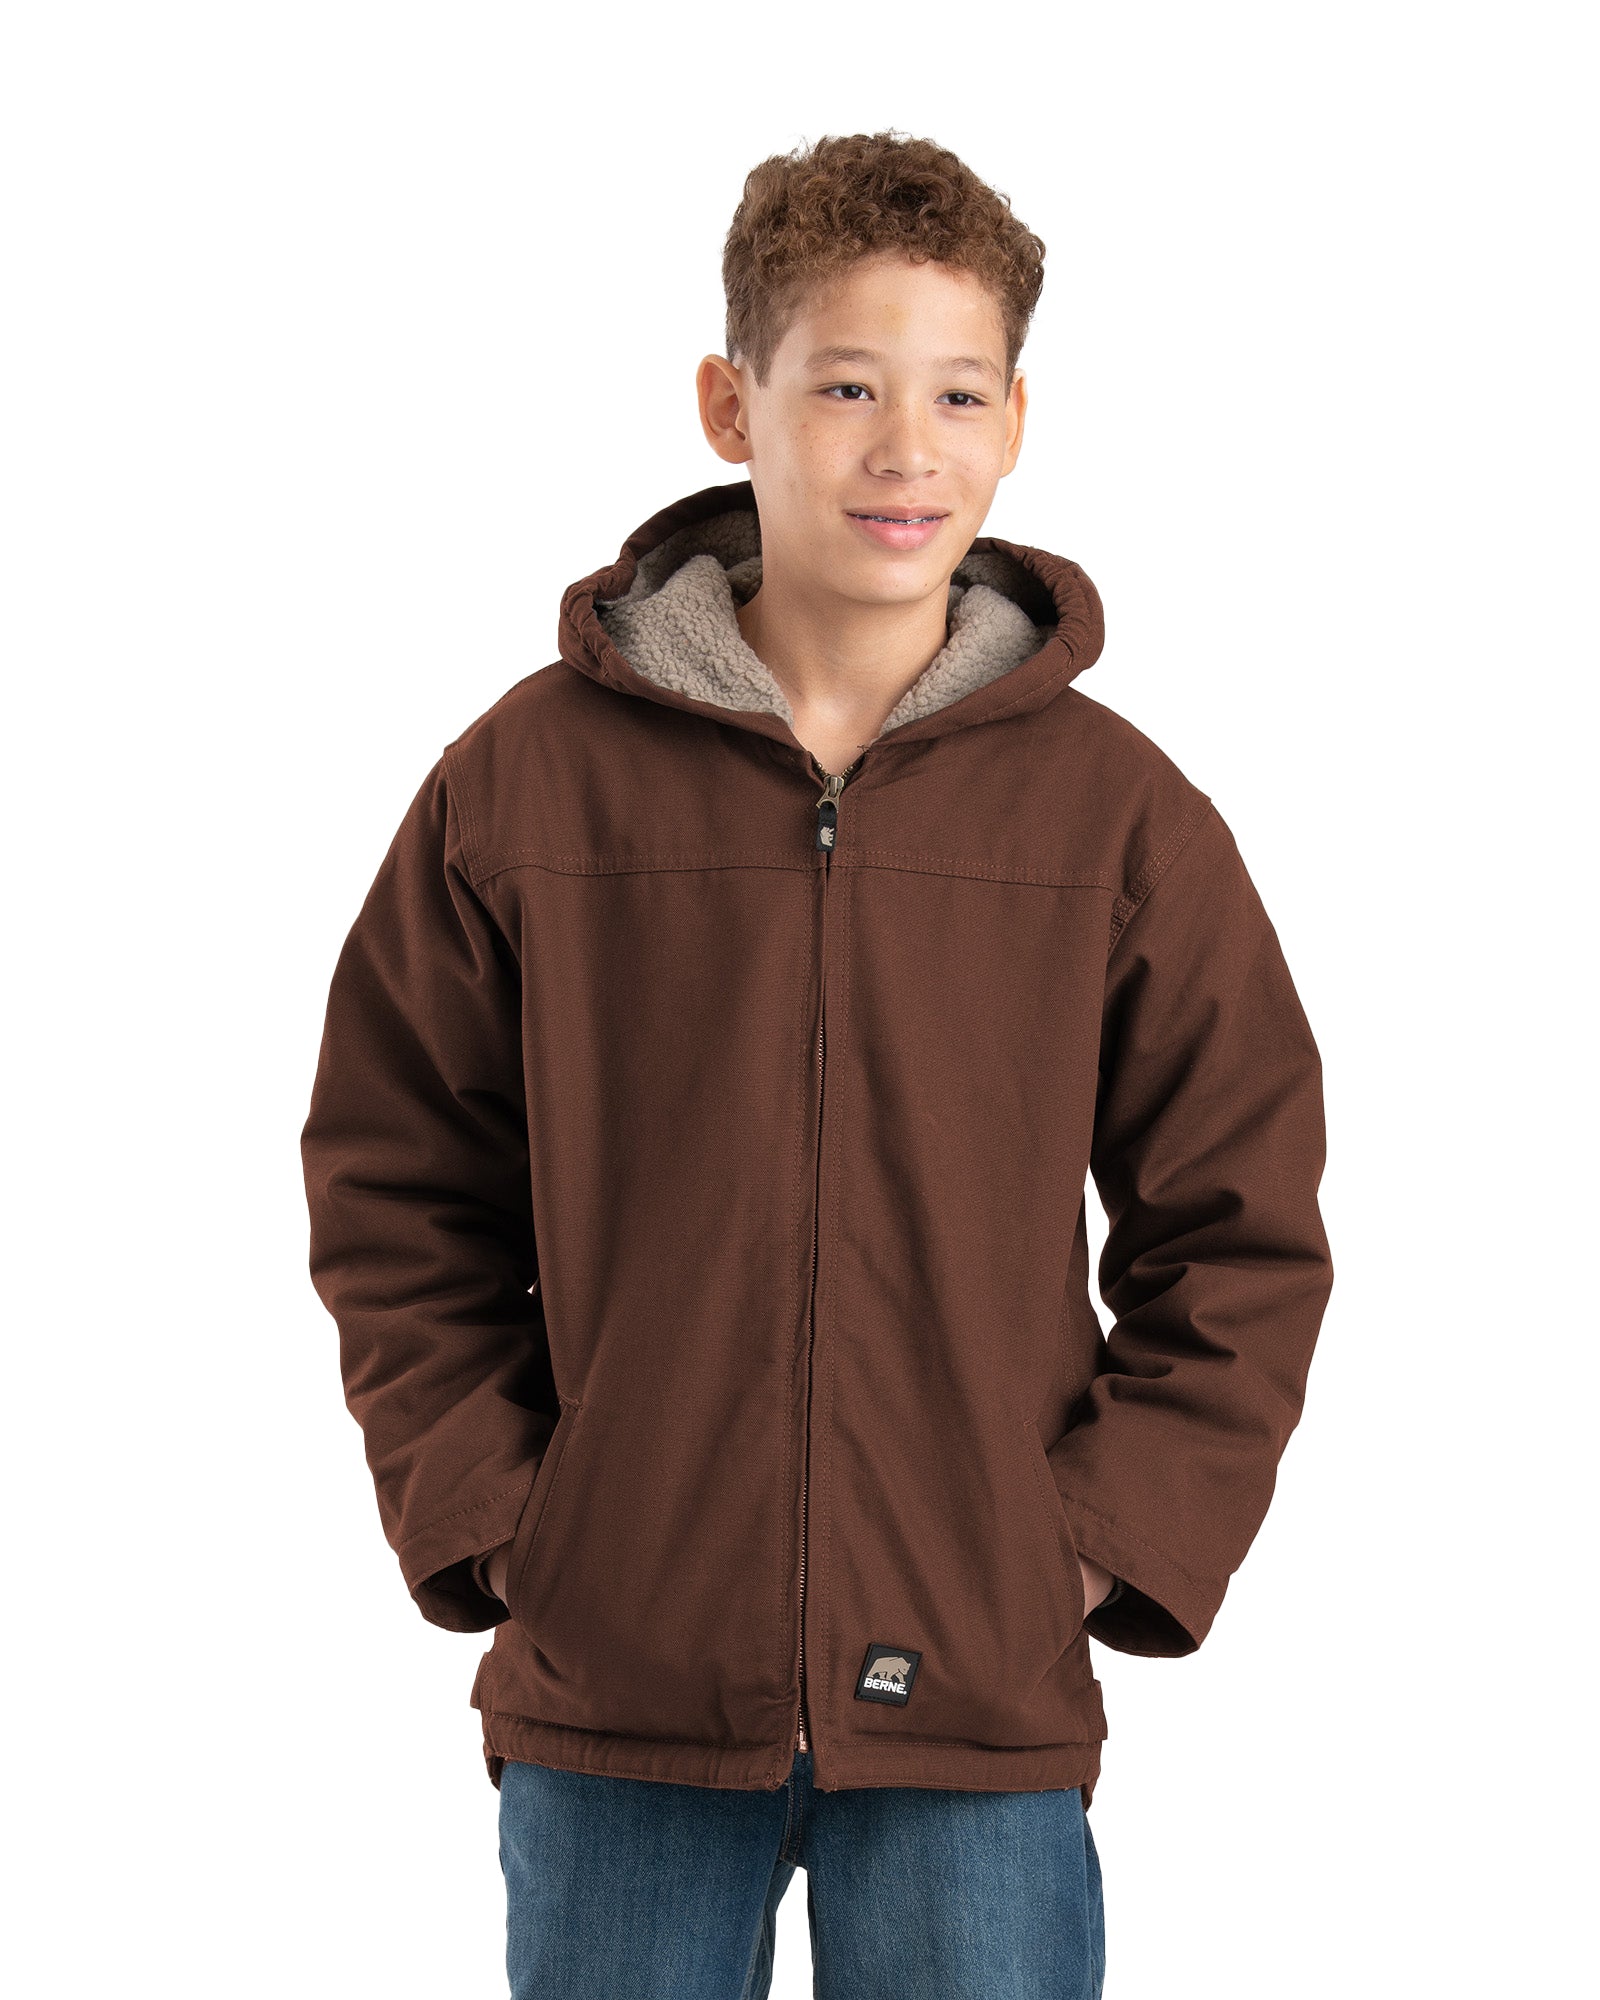 BHJ42BB Youth Sherpa-Lined Softstone Duck Hooded Jacket